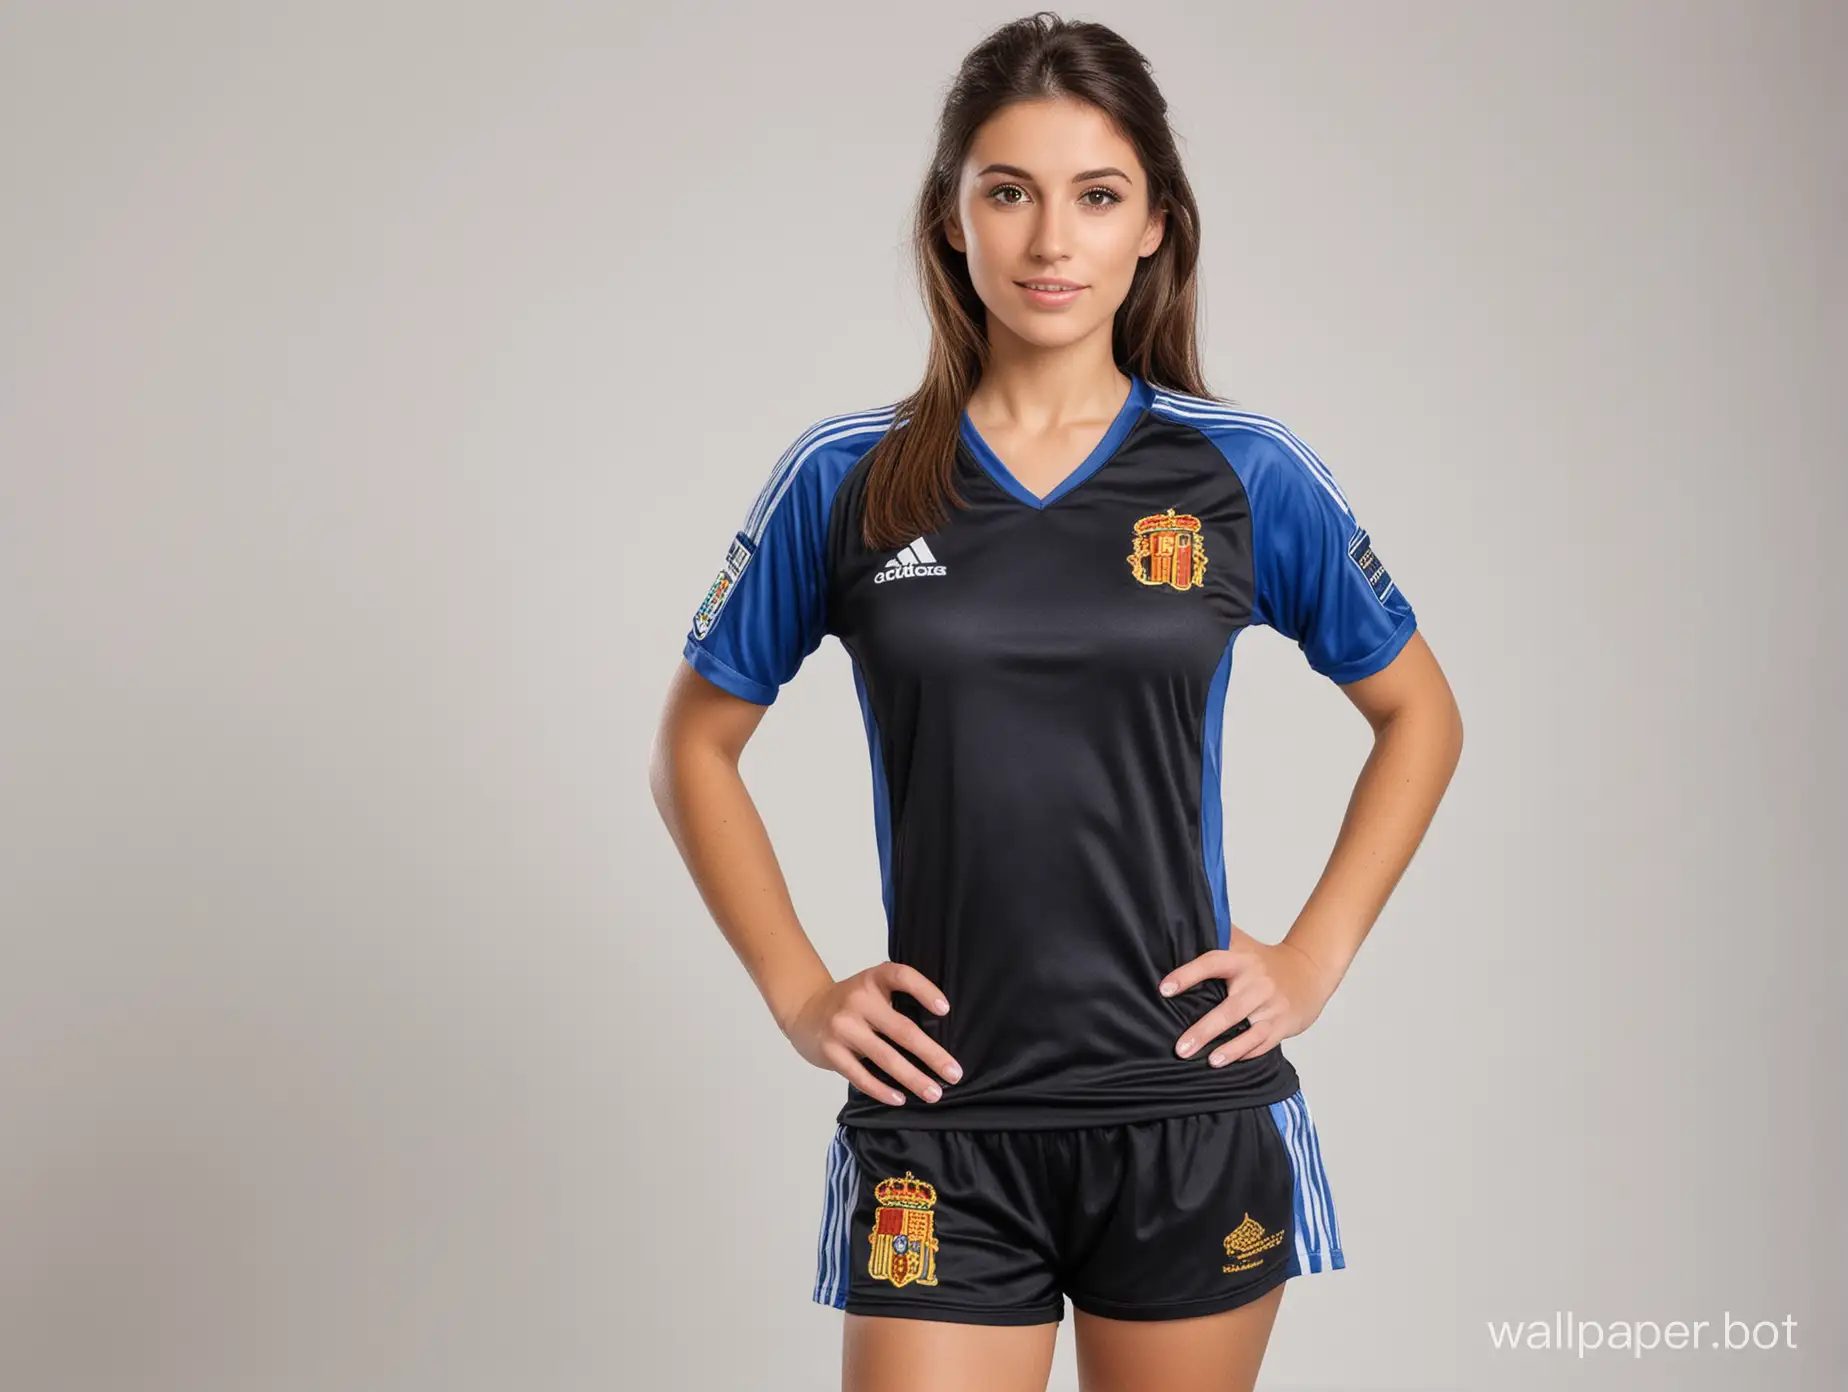 the beauty Spanish 25 years old 4 breast size narrow waist in black-and-blue soccer uniform
white background masterpiece photo portrait